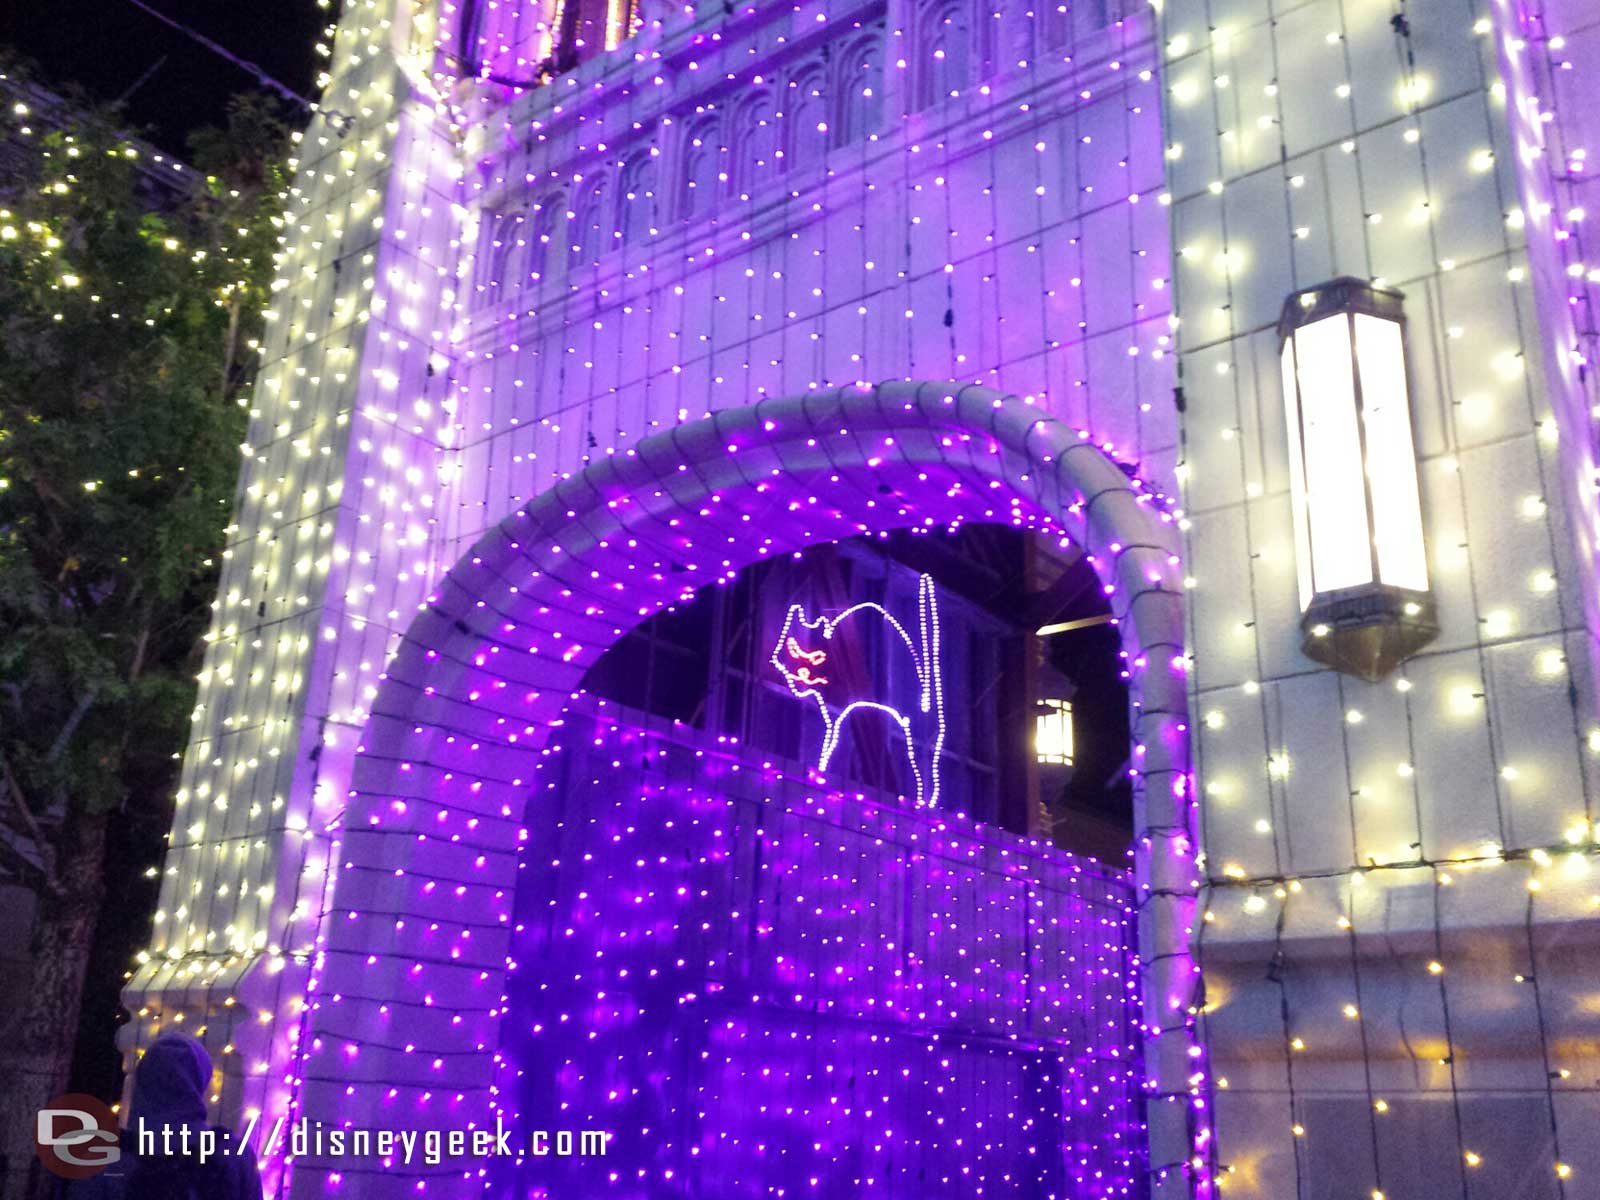 Found the cat at the Osborne Family Spectacle of Dancing Lights at Disney's Hollywood Studios.